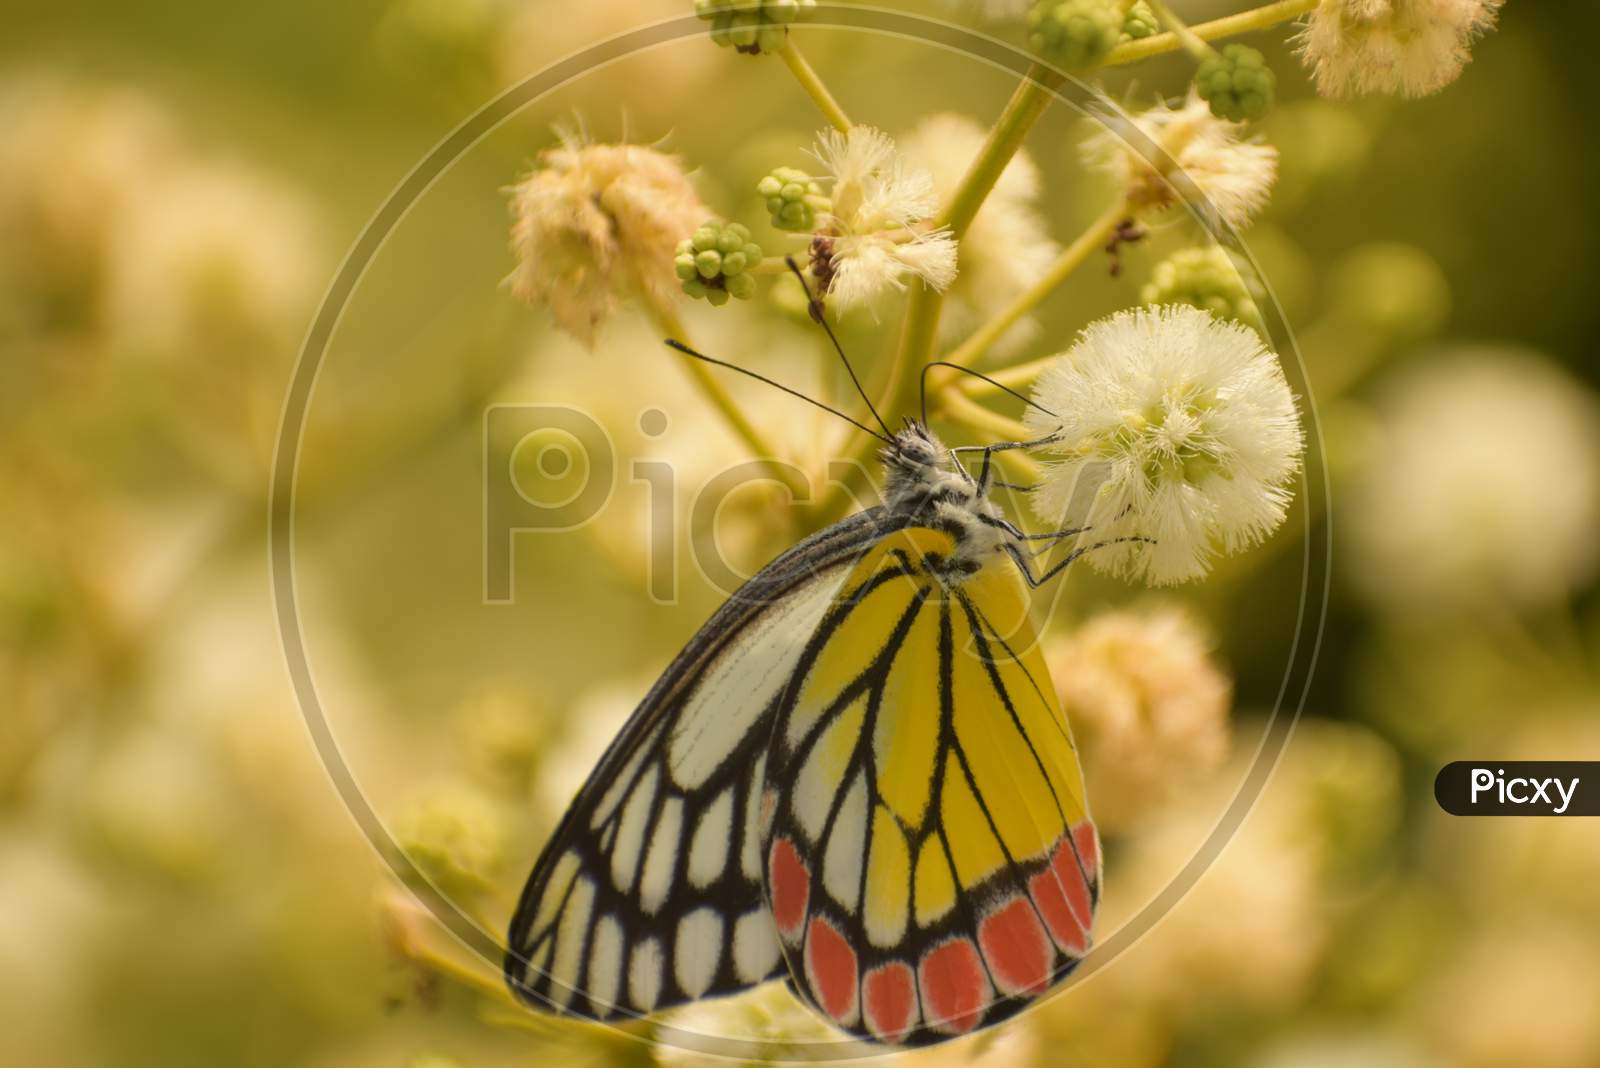 Magnificient Wallpaper Of Common Jezabel ( Delias Eucharis ) Butterfly Sucking Nector From White Flower,